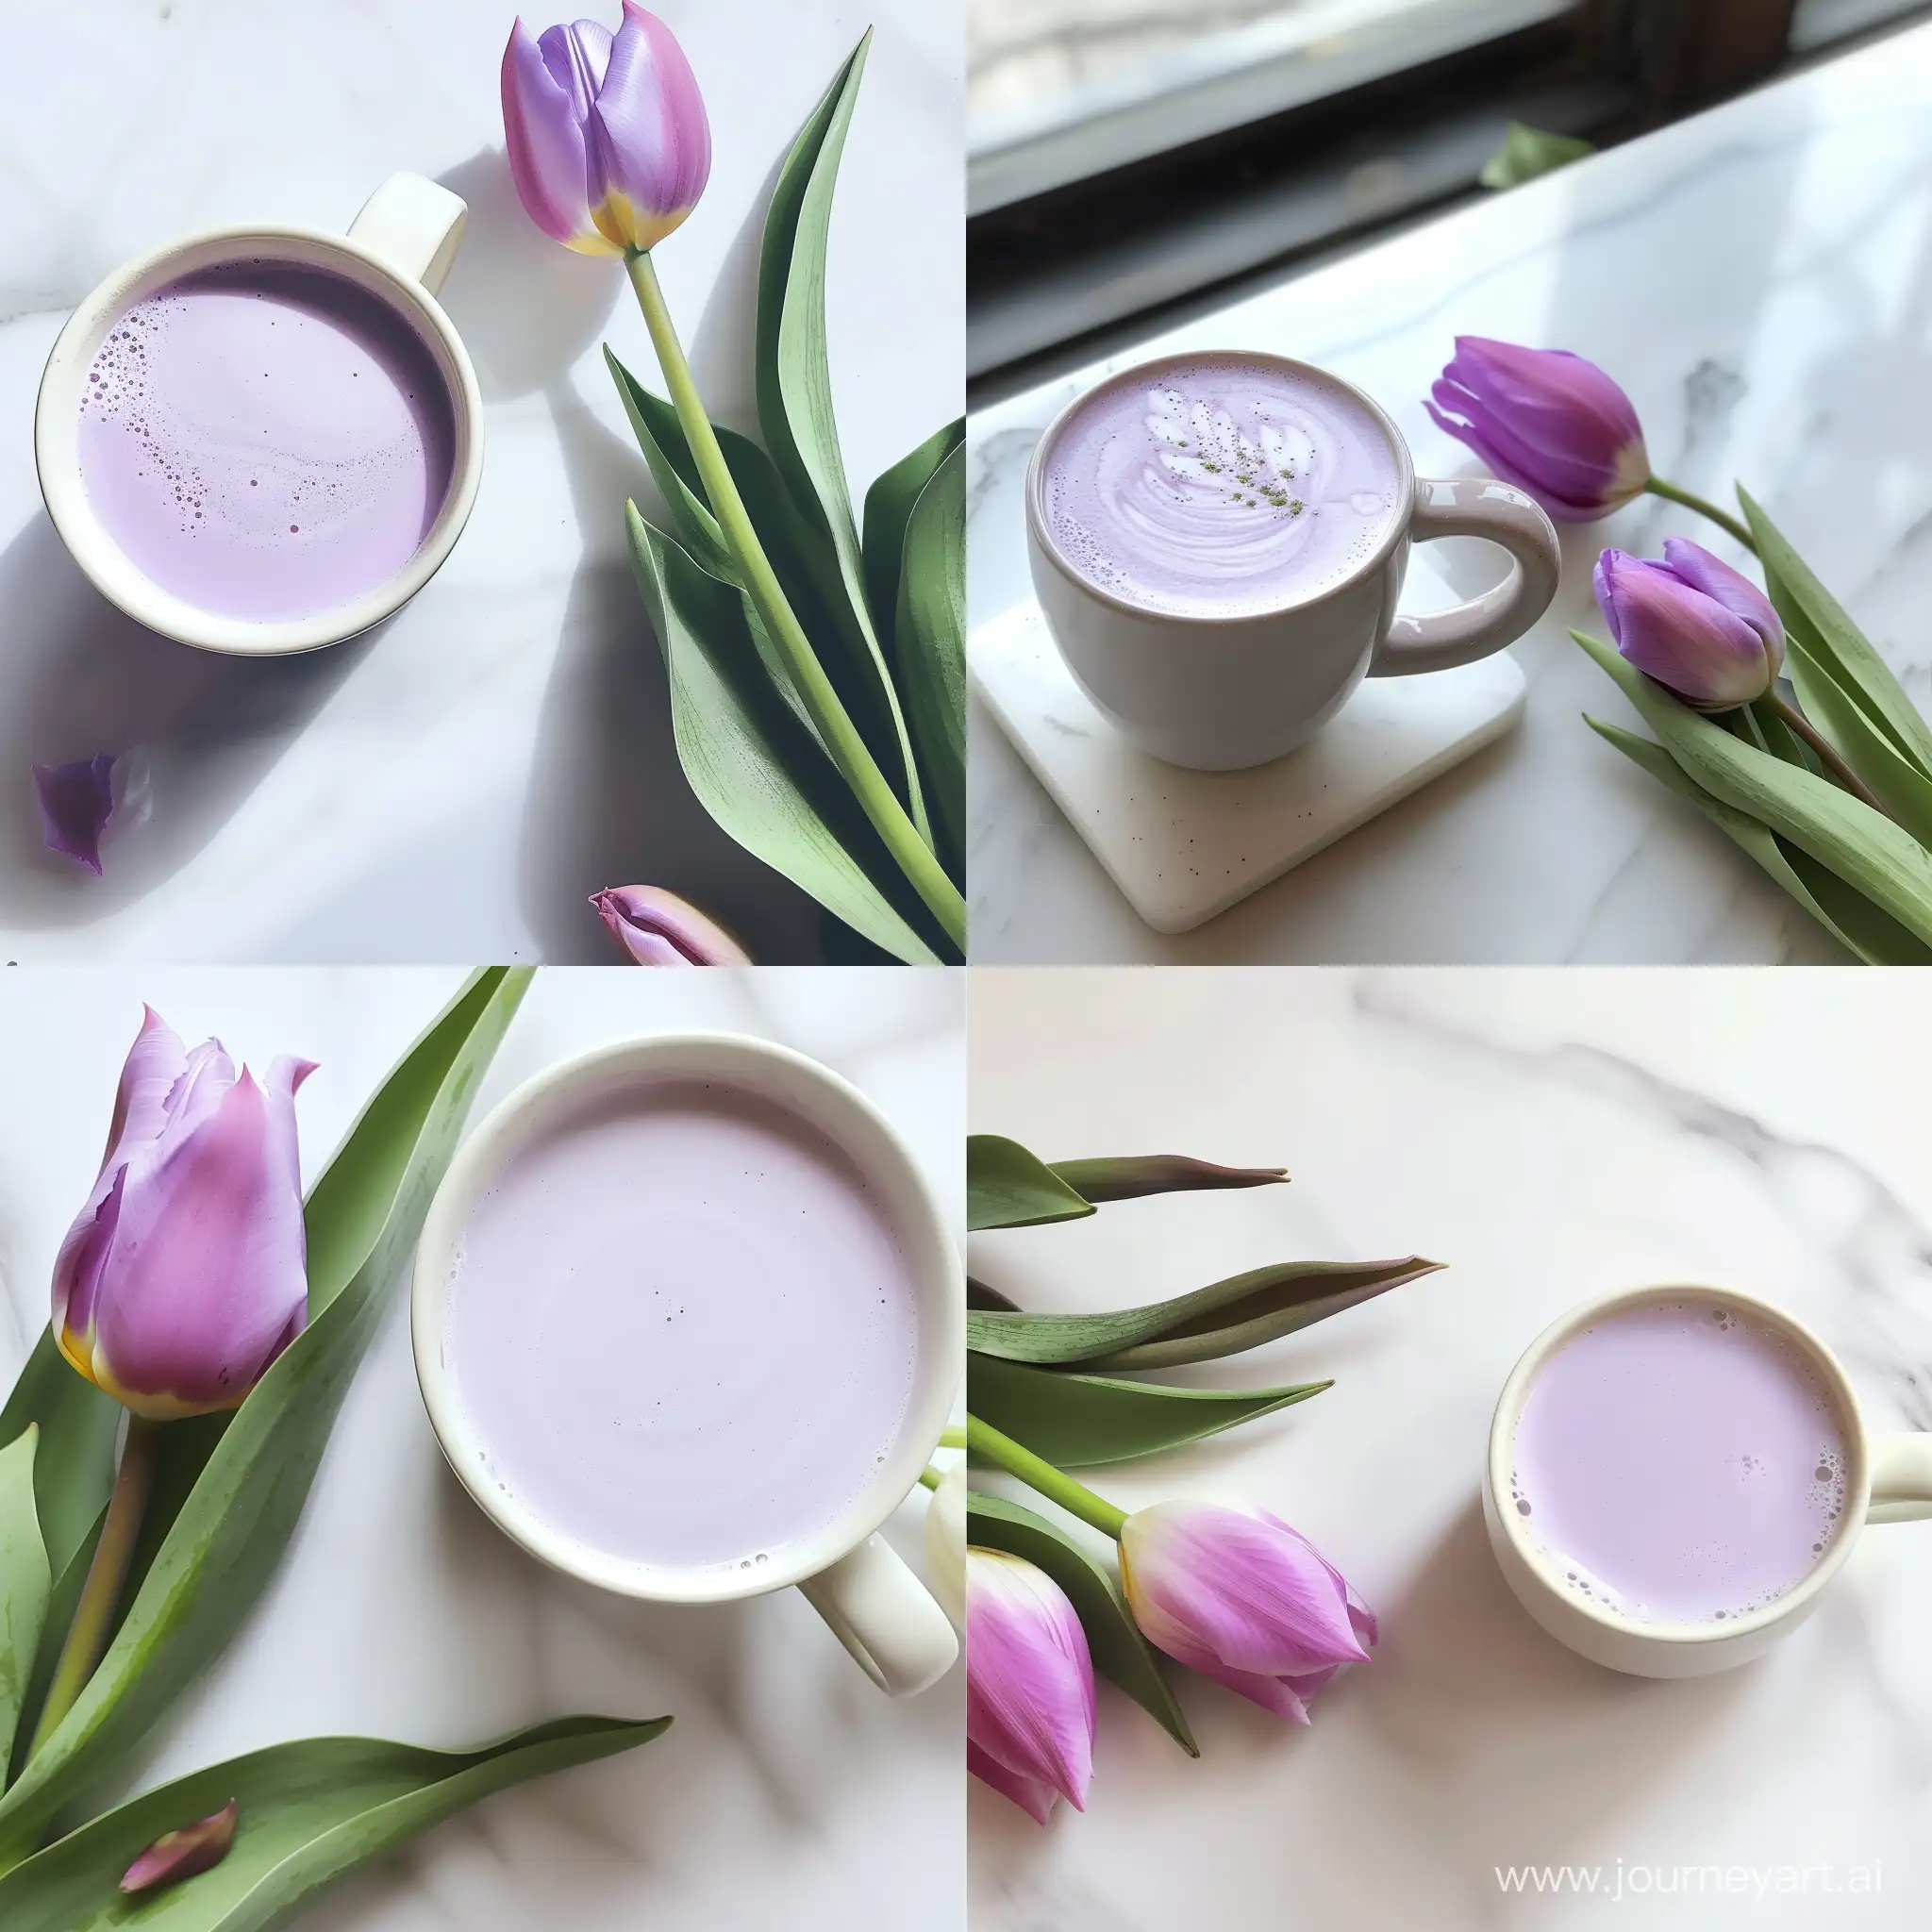 LavenderColored-Latte-on-a-White-Marble-Table-Beside-a-Tulip